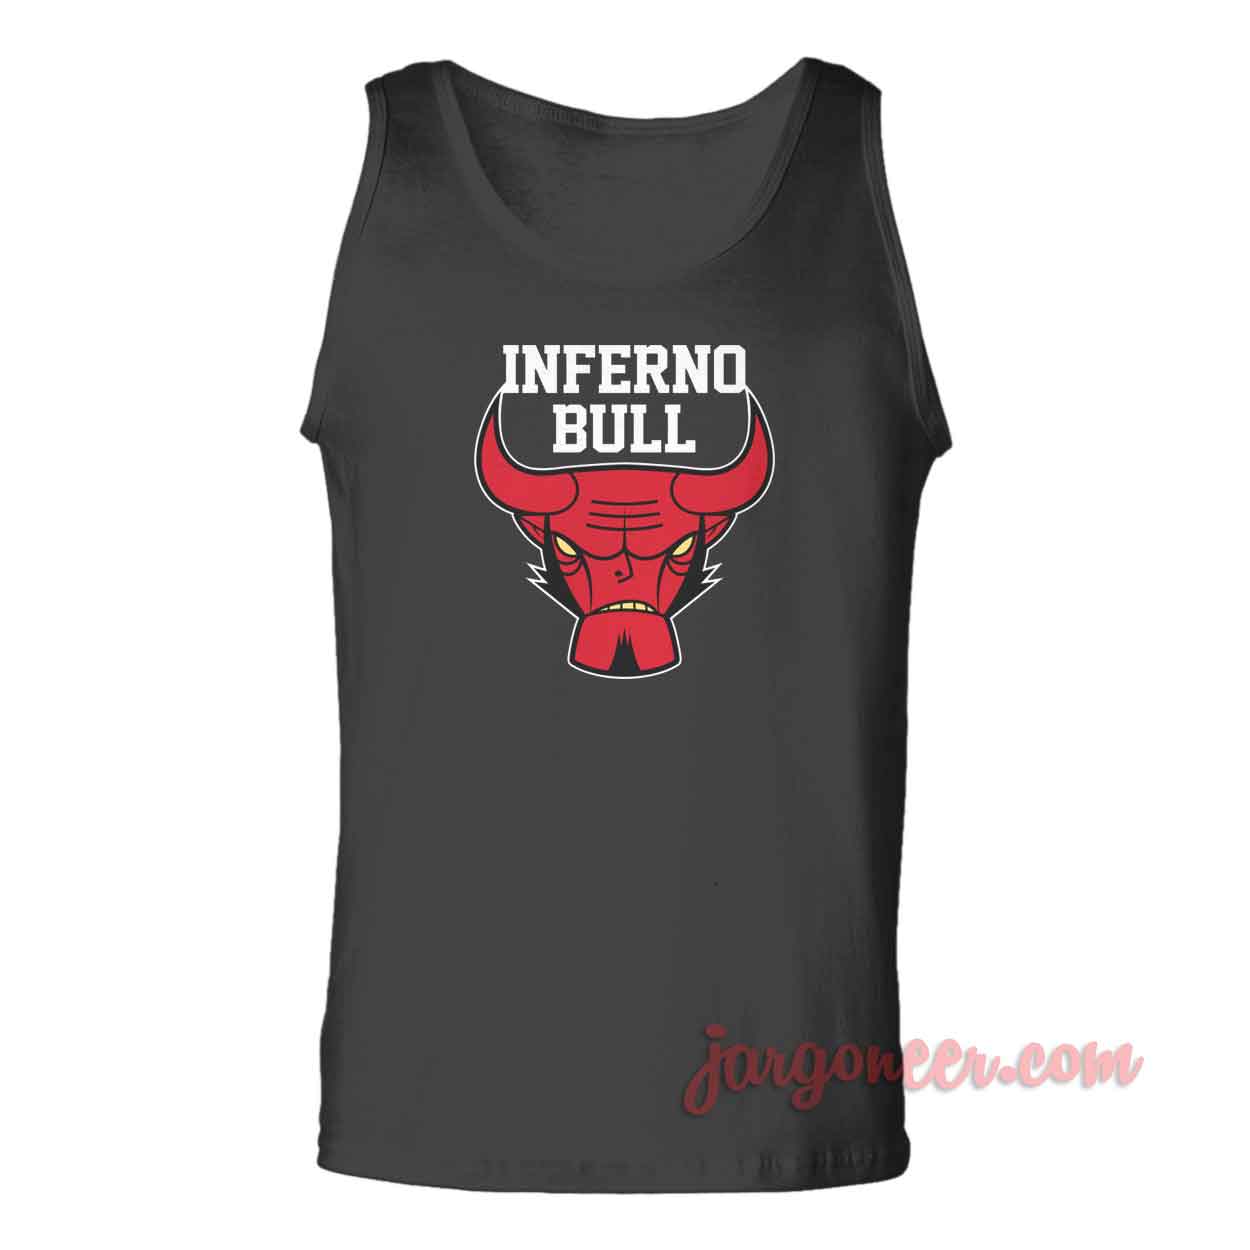 Inferno Hell Bull - Shop Unique Graphic Cool Shirt Designs